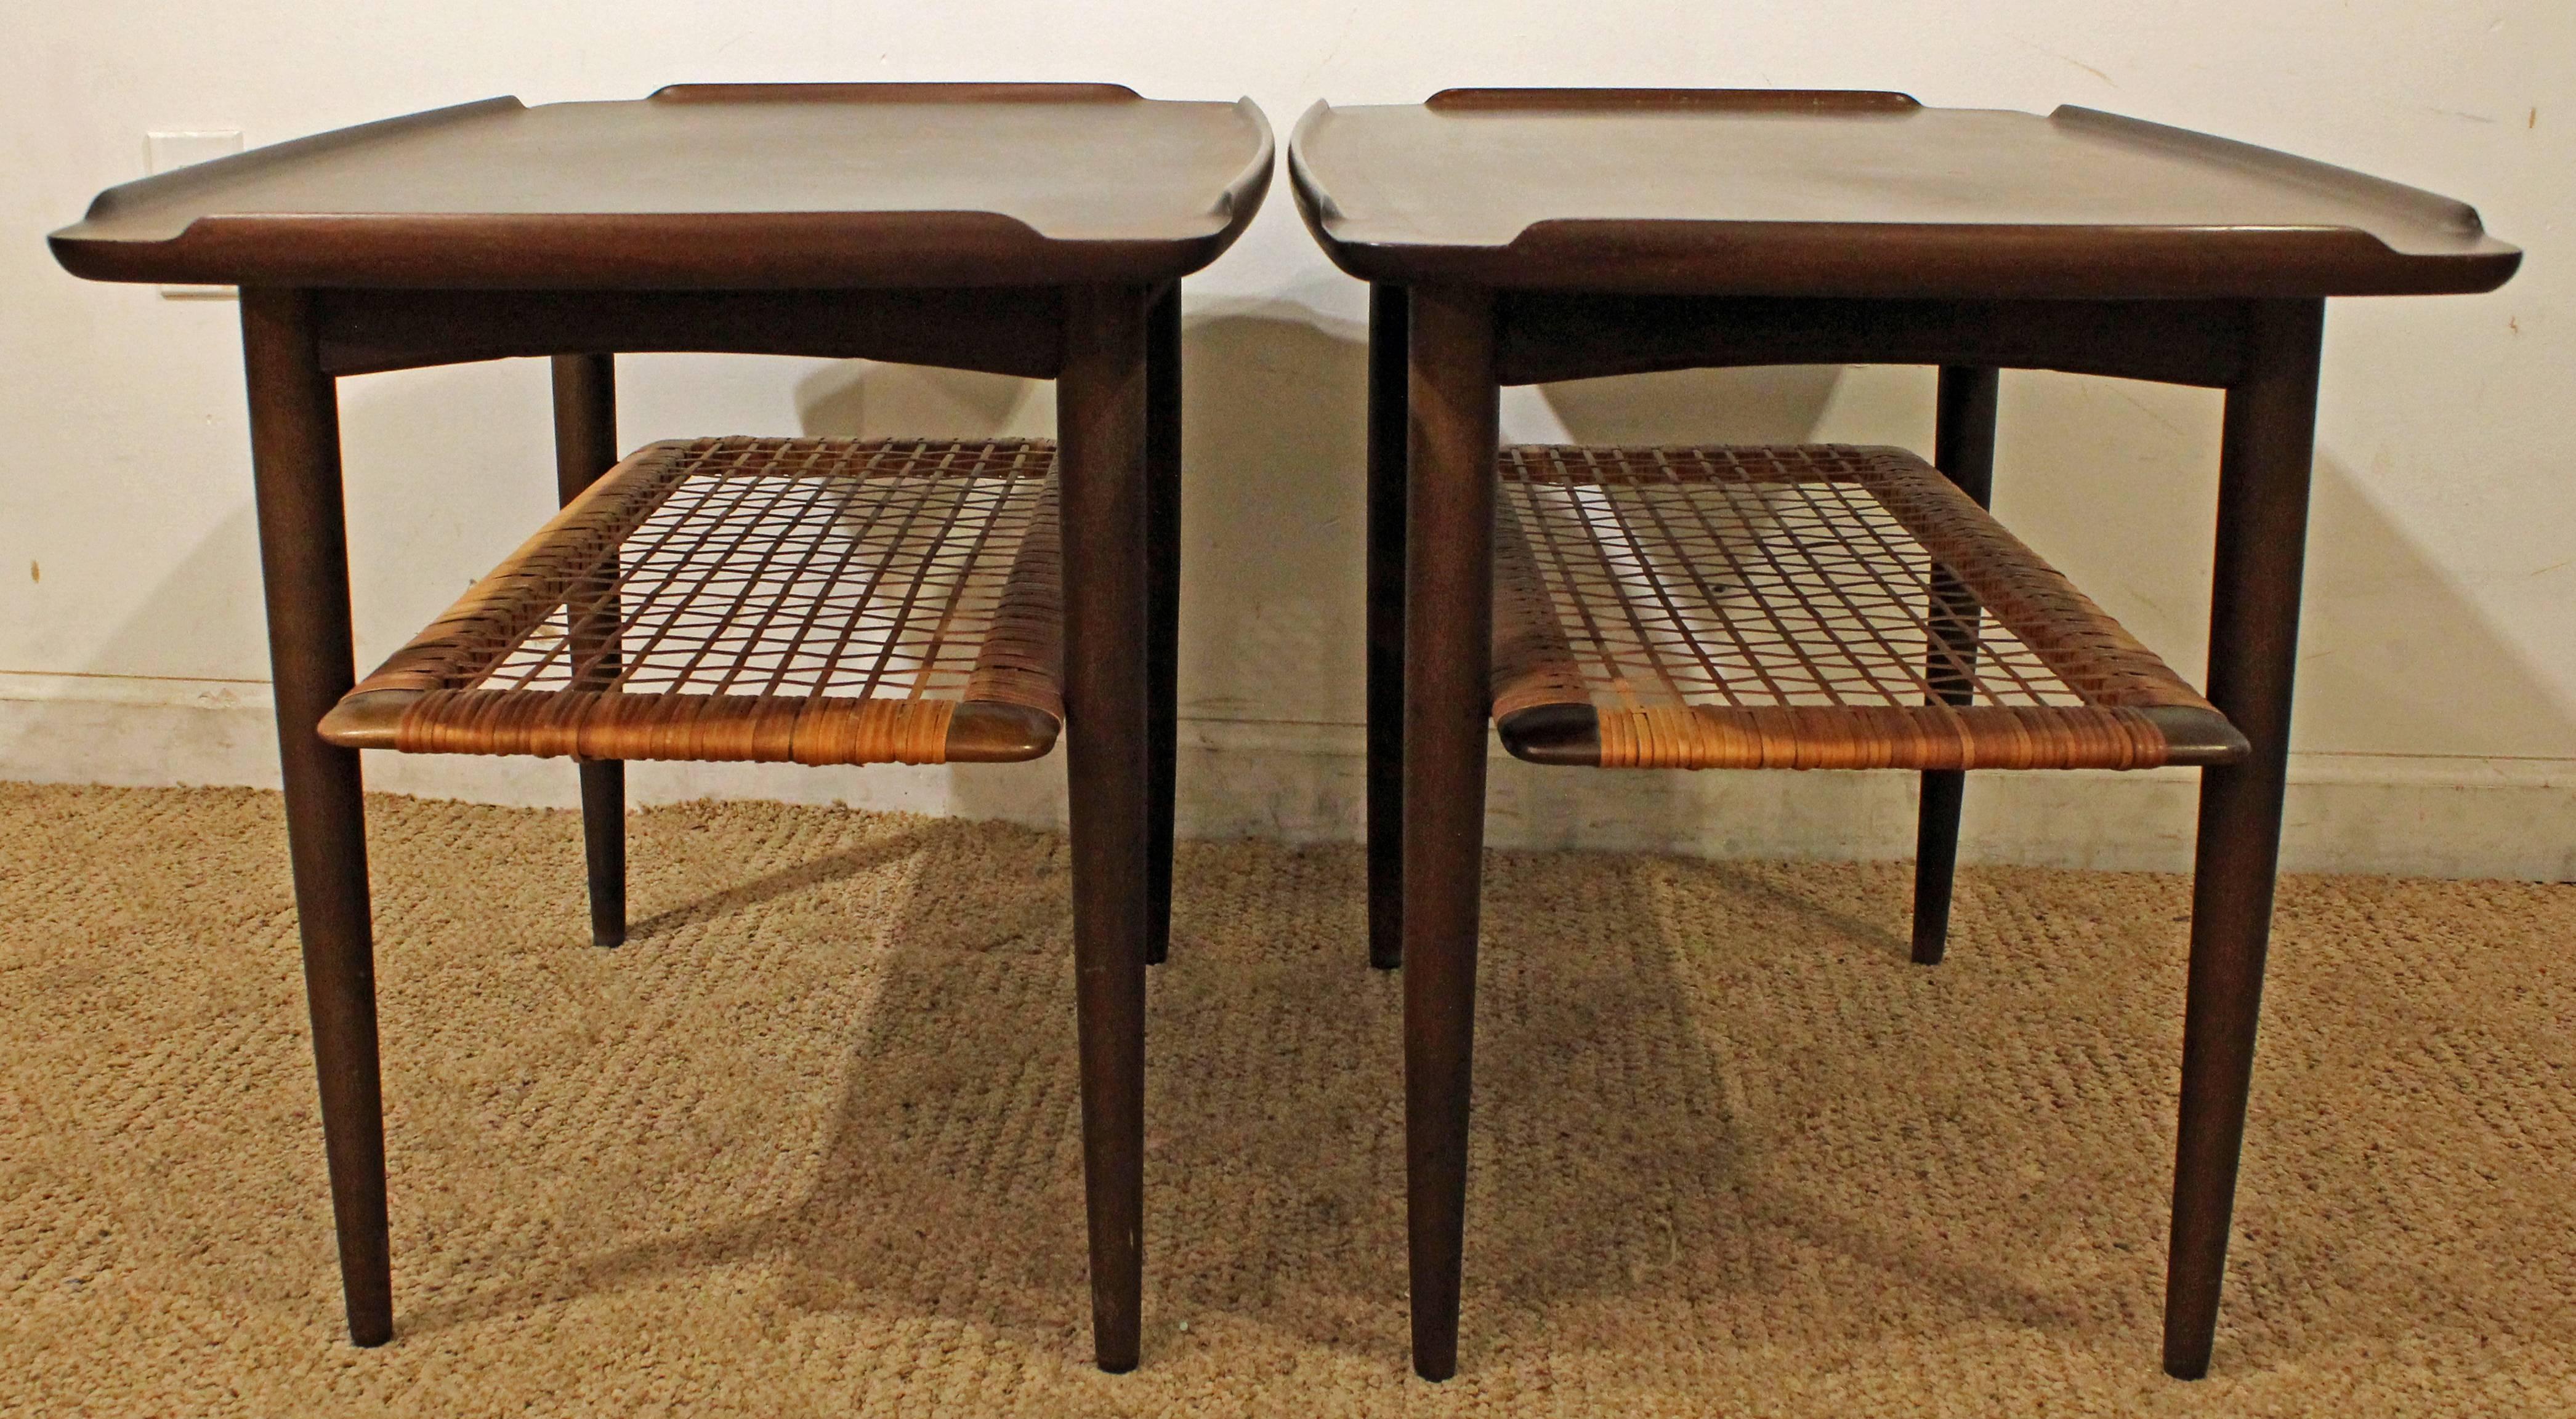 These were designed by Poul Jensen for Selig. The tables are made of teak. They have an upturned raised edge on all four sides and a caned shelf. They have been completely restored.